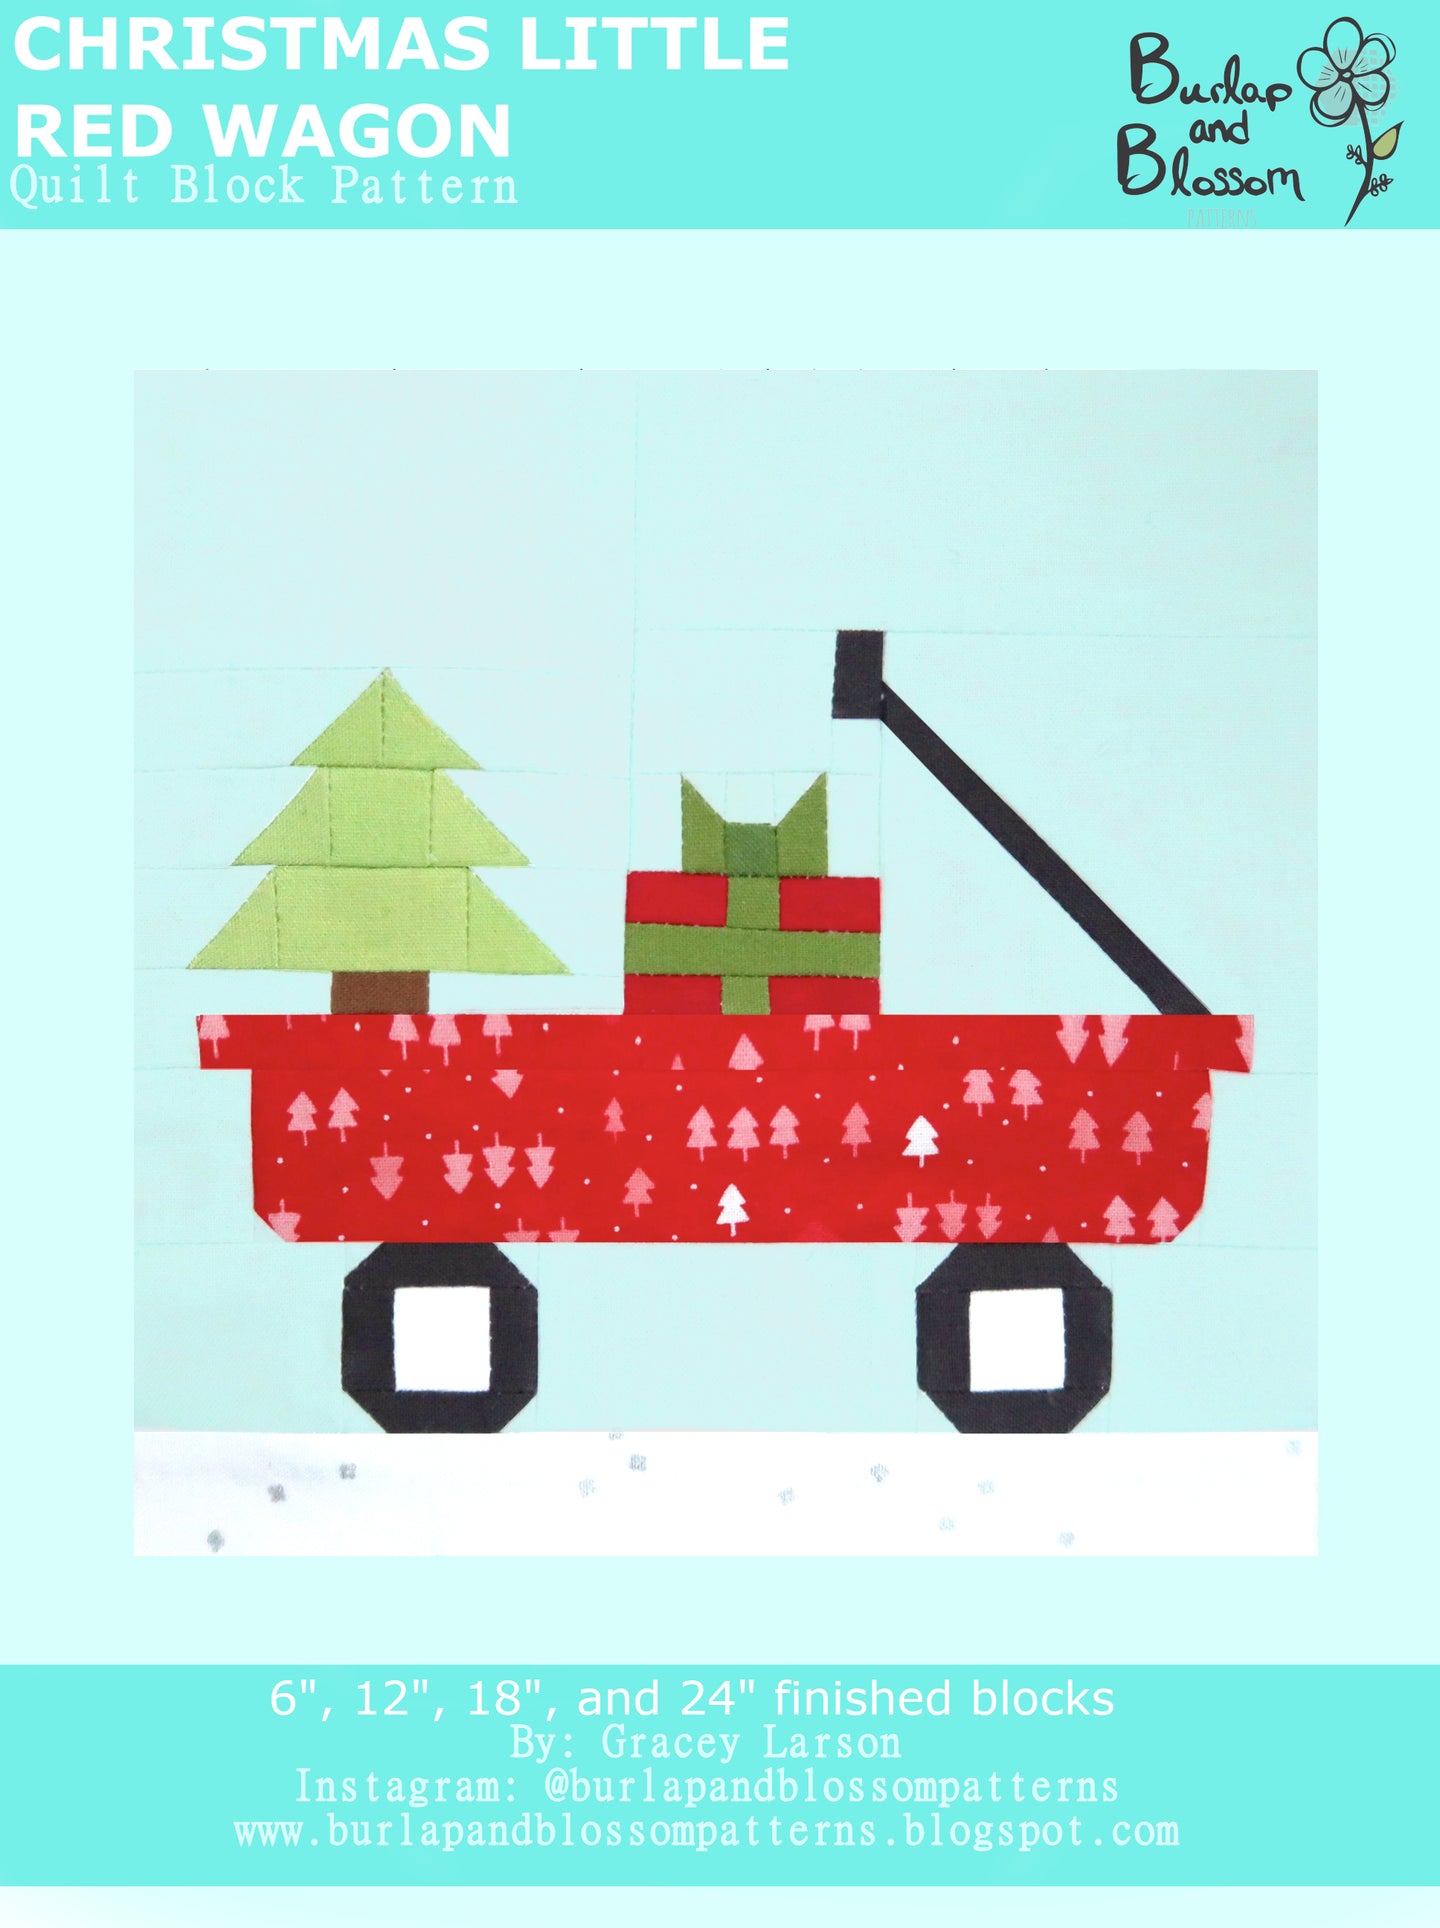 Pattern, Christmas Little Red Wagon Quilt Block by Burlap and Blossom (digital download)